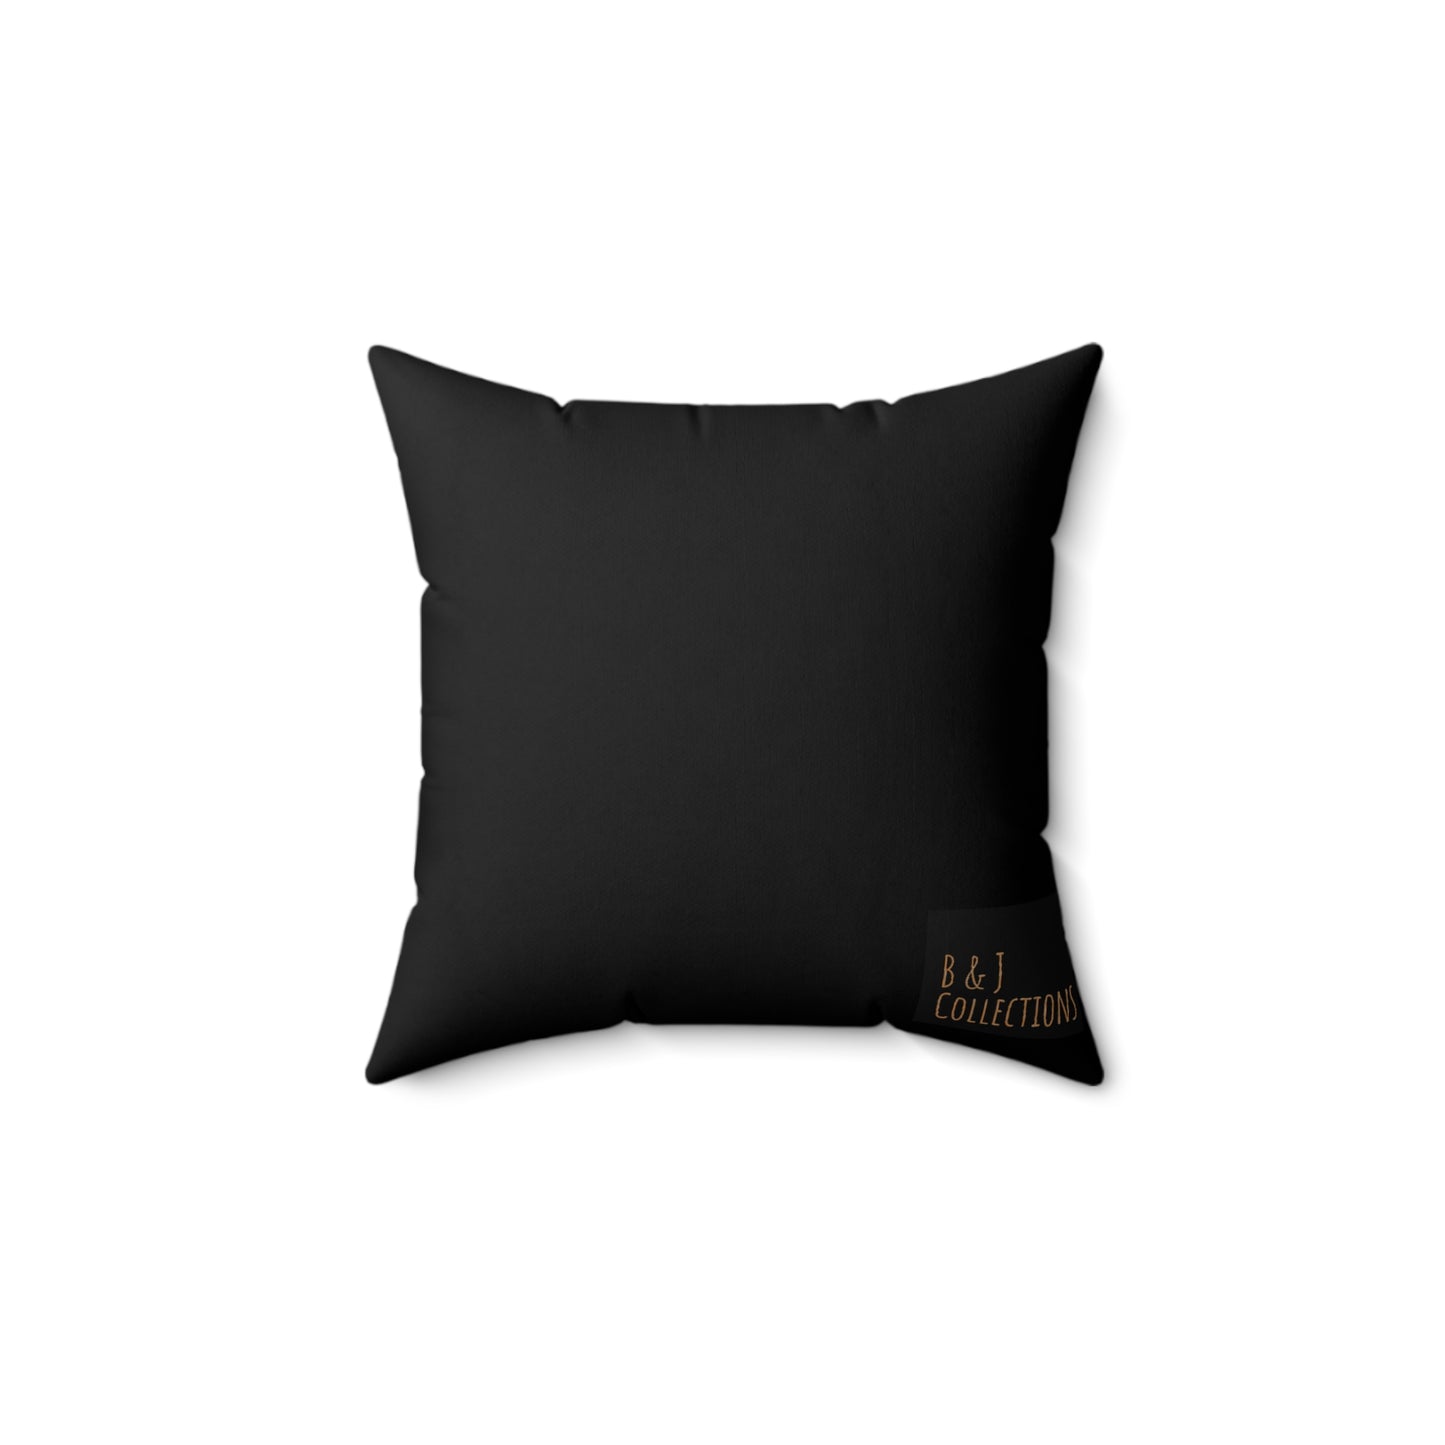 Pink Buttercup Polyester Square Pillow (SP Photography Collection) BLACK